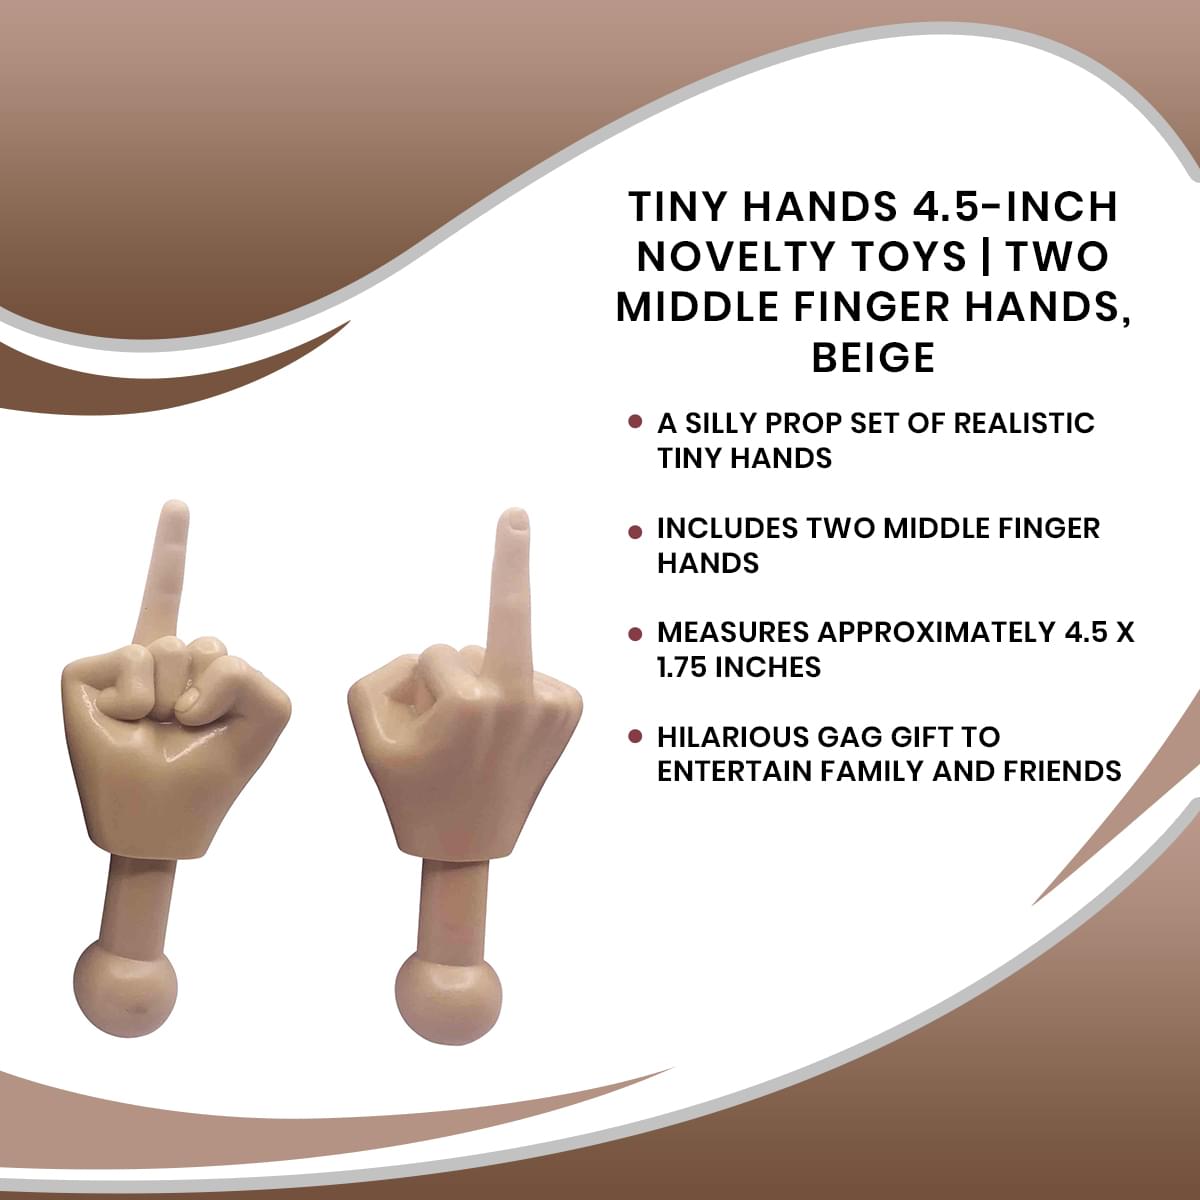 Tiny Hands Two Middle Finger Hands Beige